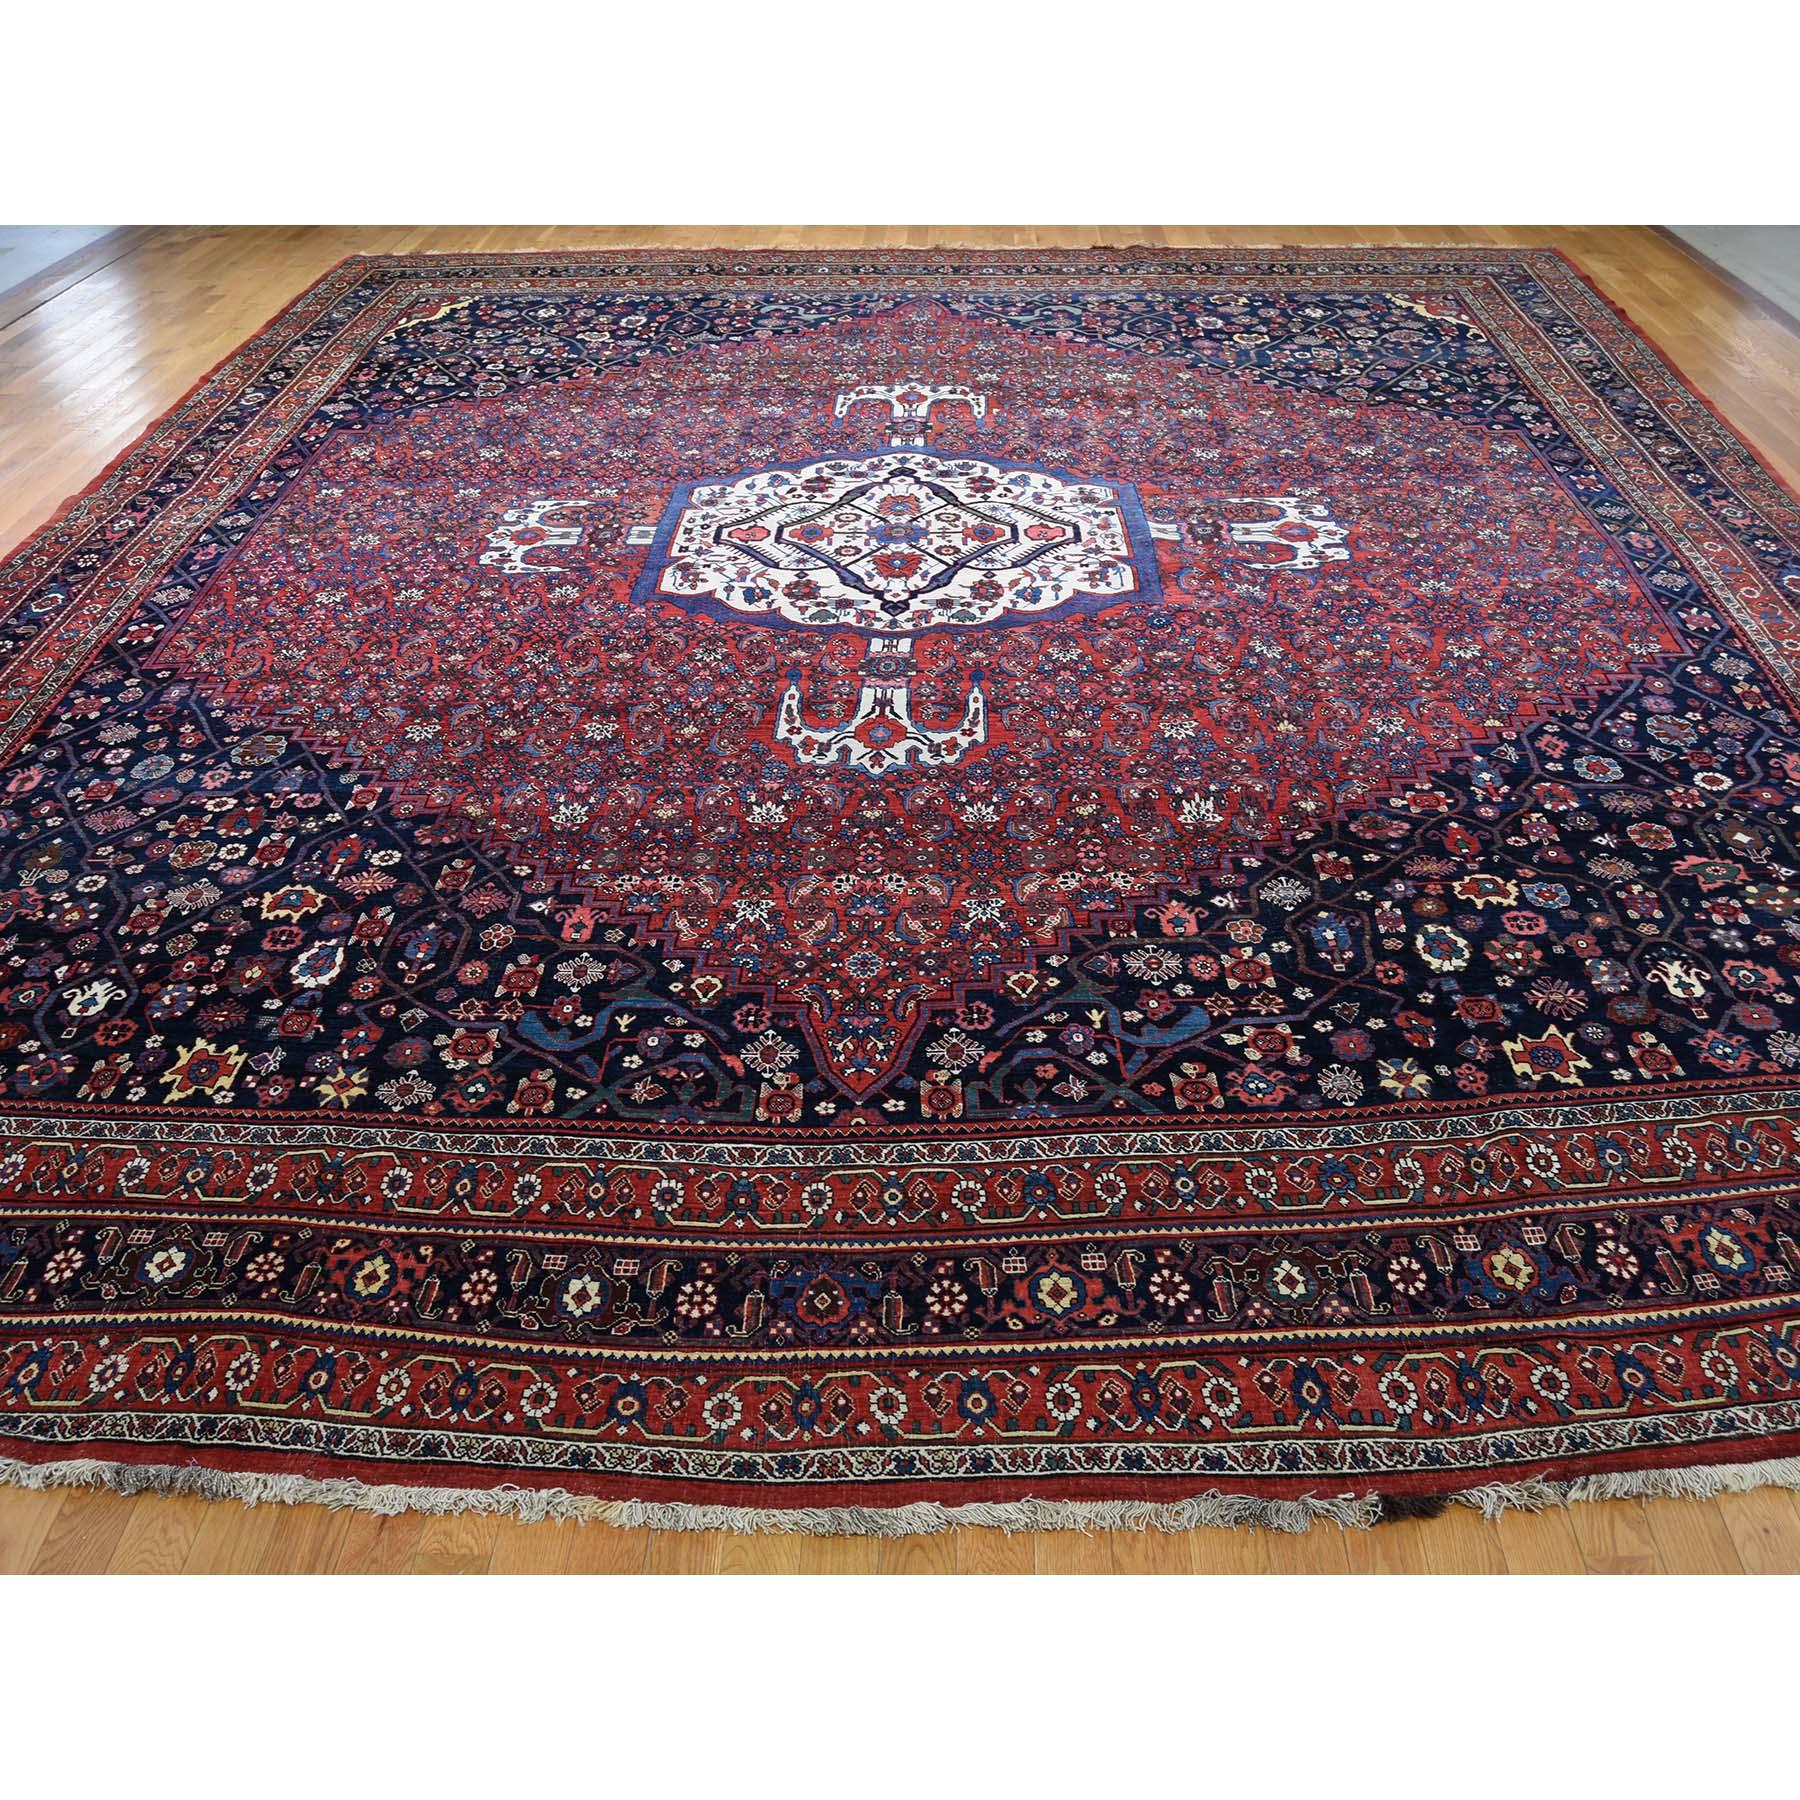 Medieval Antique Persian Bijar Pure Wool Exc Condition Wide Gallery Hand Knotted For Sale